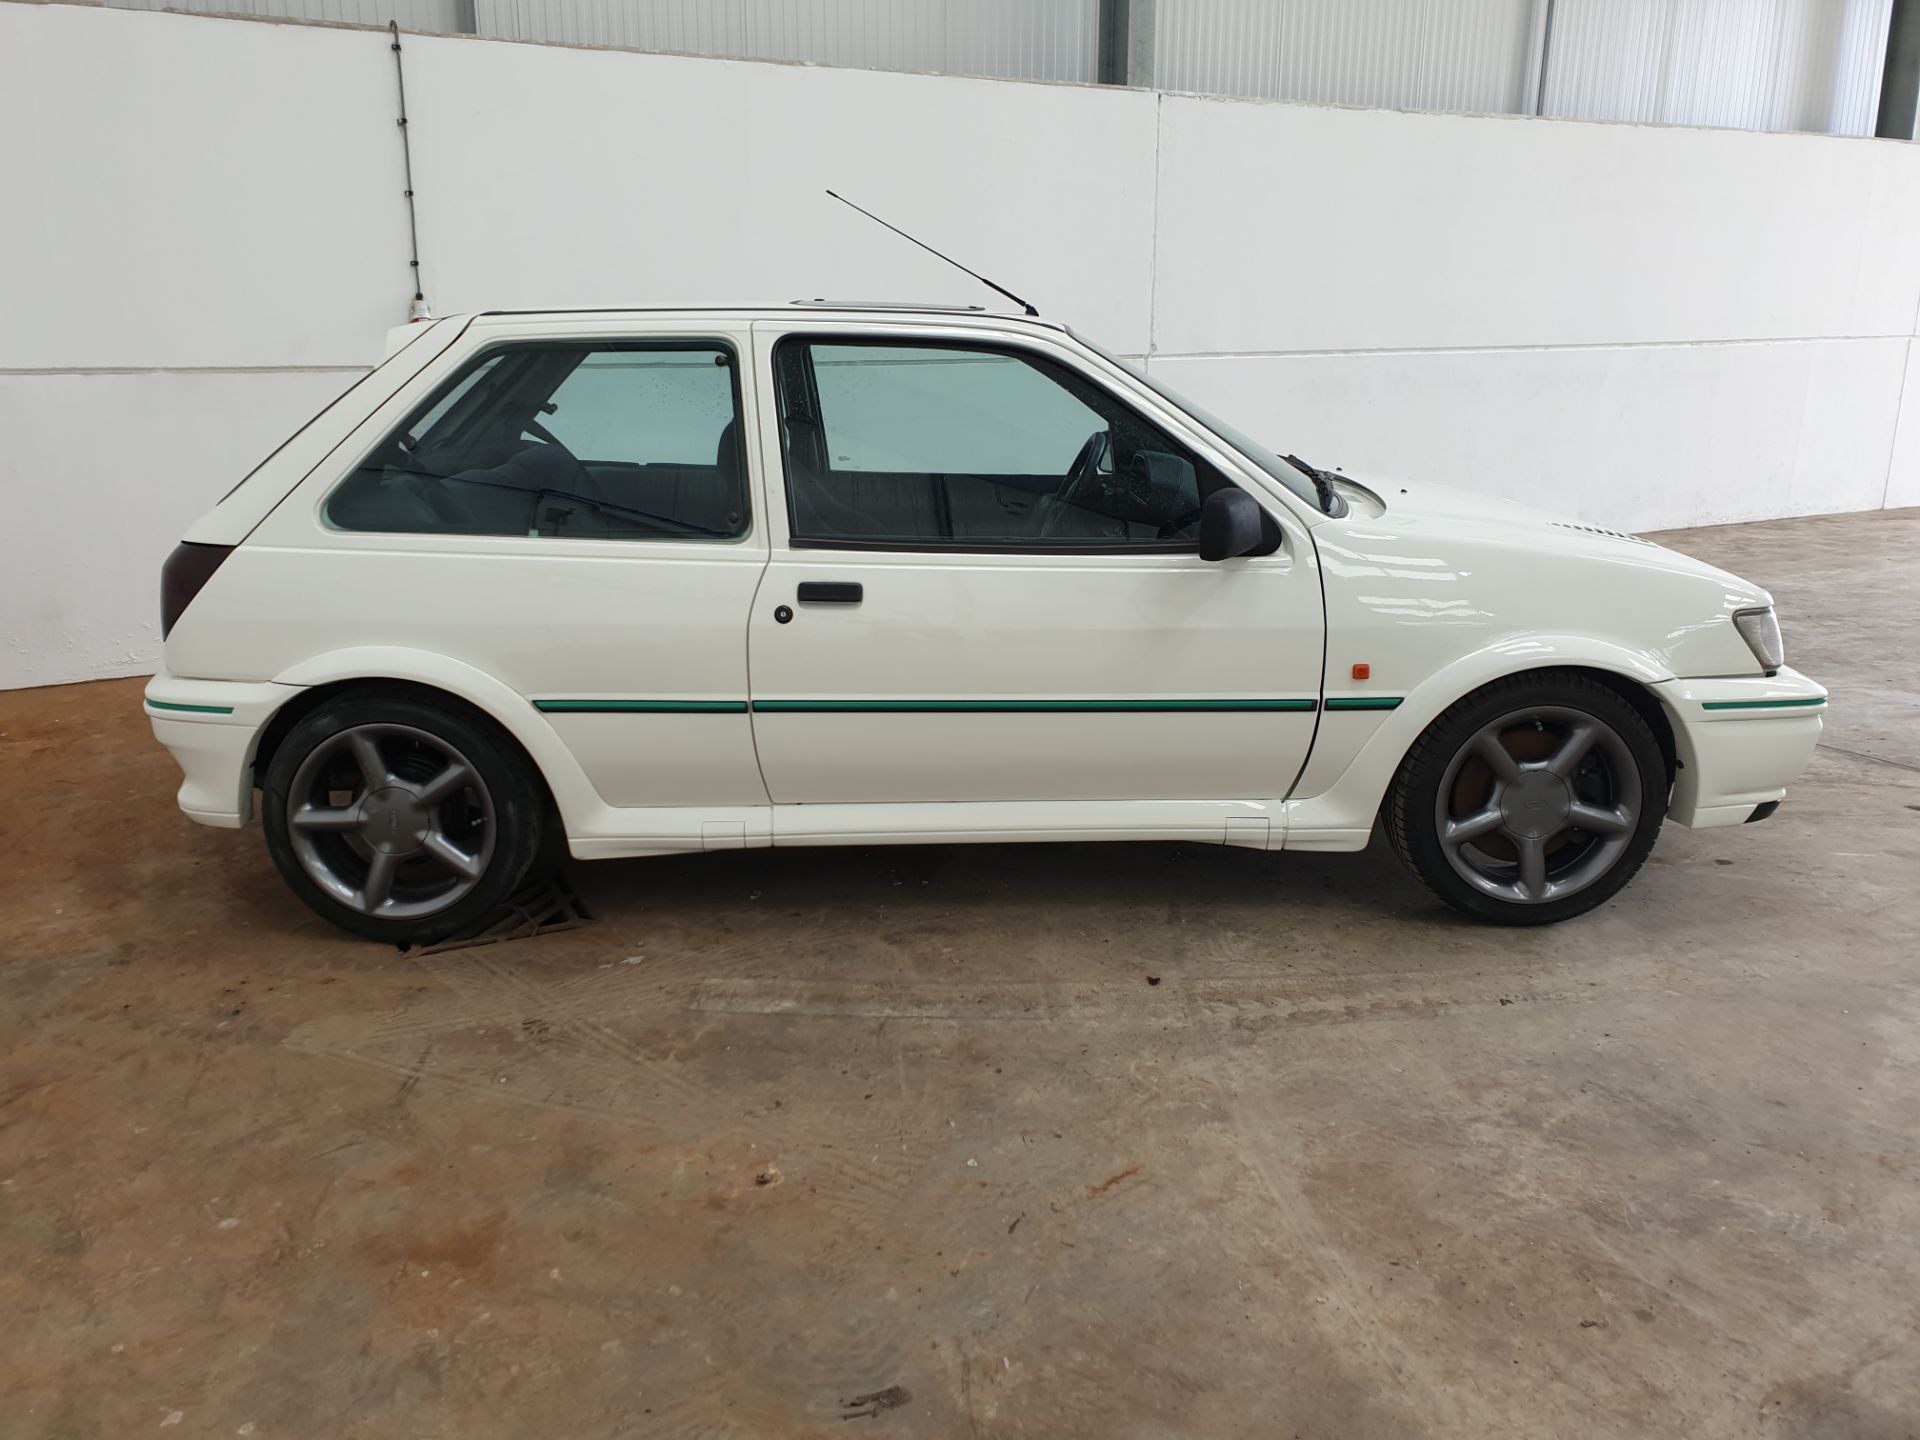 1991 Ford Fiesta RS Turbo LHD - Image 2 of 13